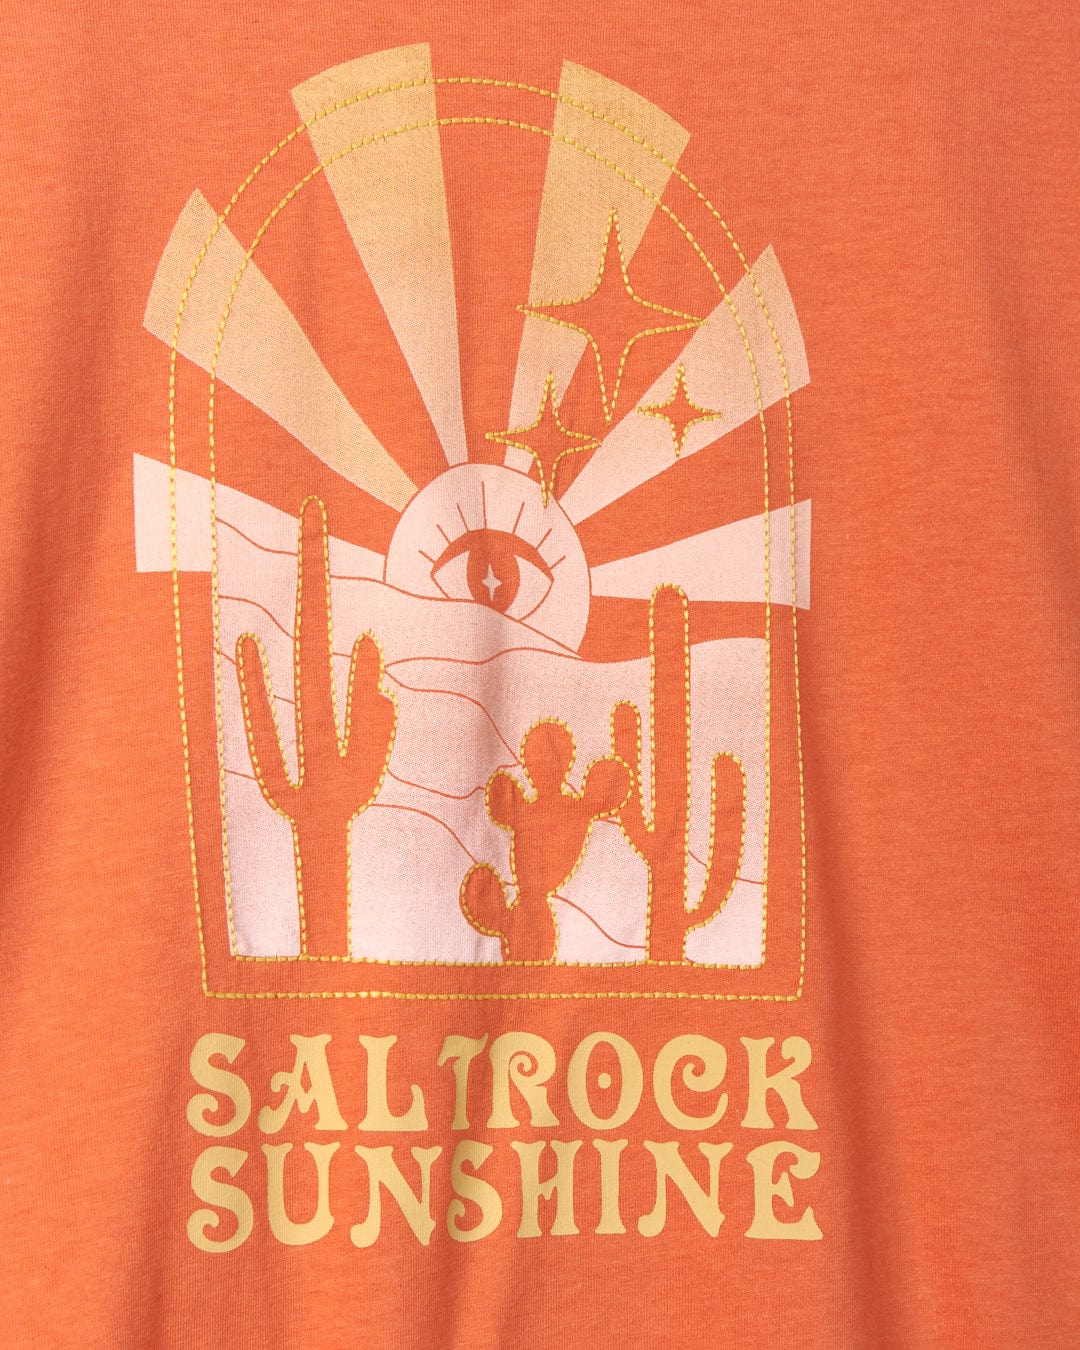 An orange graphic T-shirt featuring a mystic desert sunset design with cacti, stars, and the text "Saltrock Sunshine," complete with Saltrock branding on a boxy, relaxed fit.

Product Name: Saltrock Sunshine - Recycled Womens Cropped T-Shirt - Orange
Brand Name: Saltrock